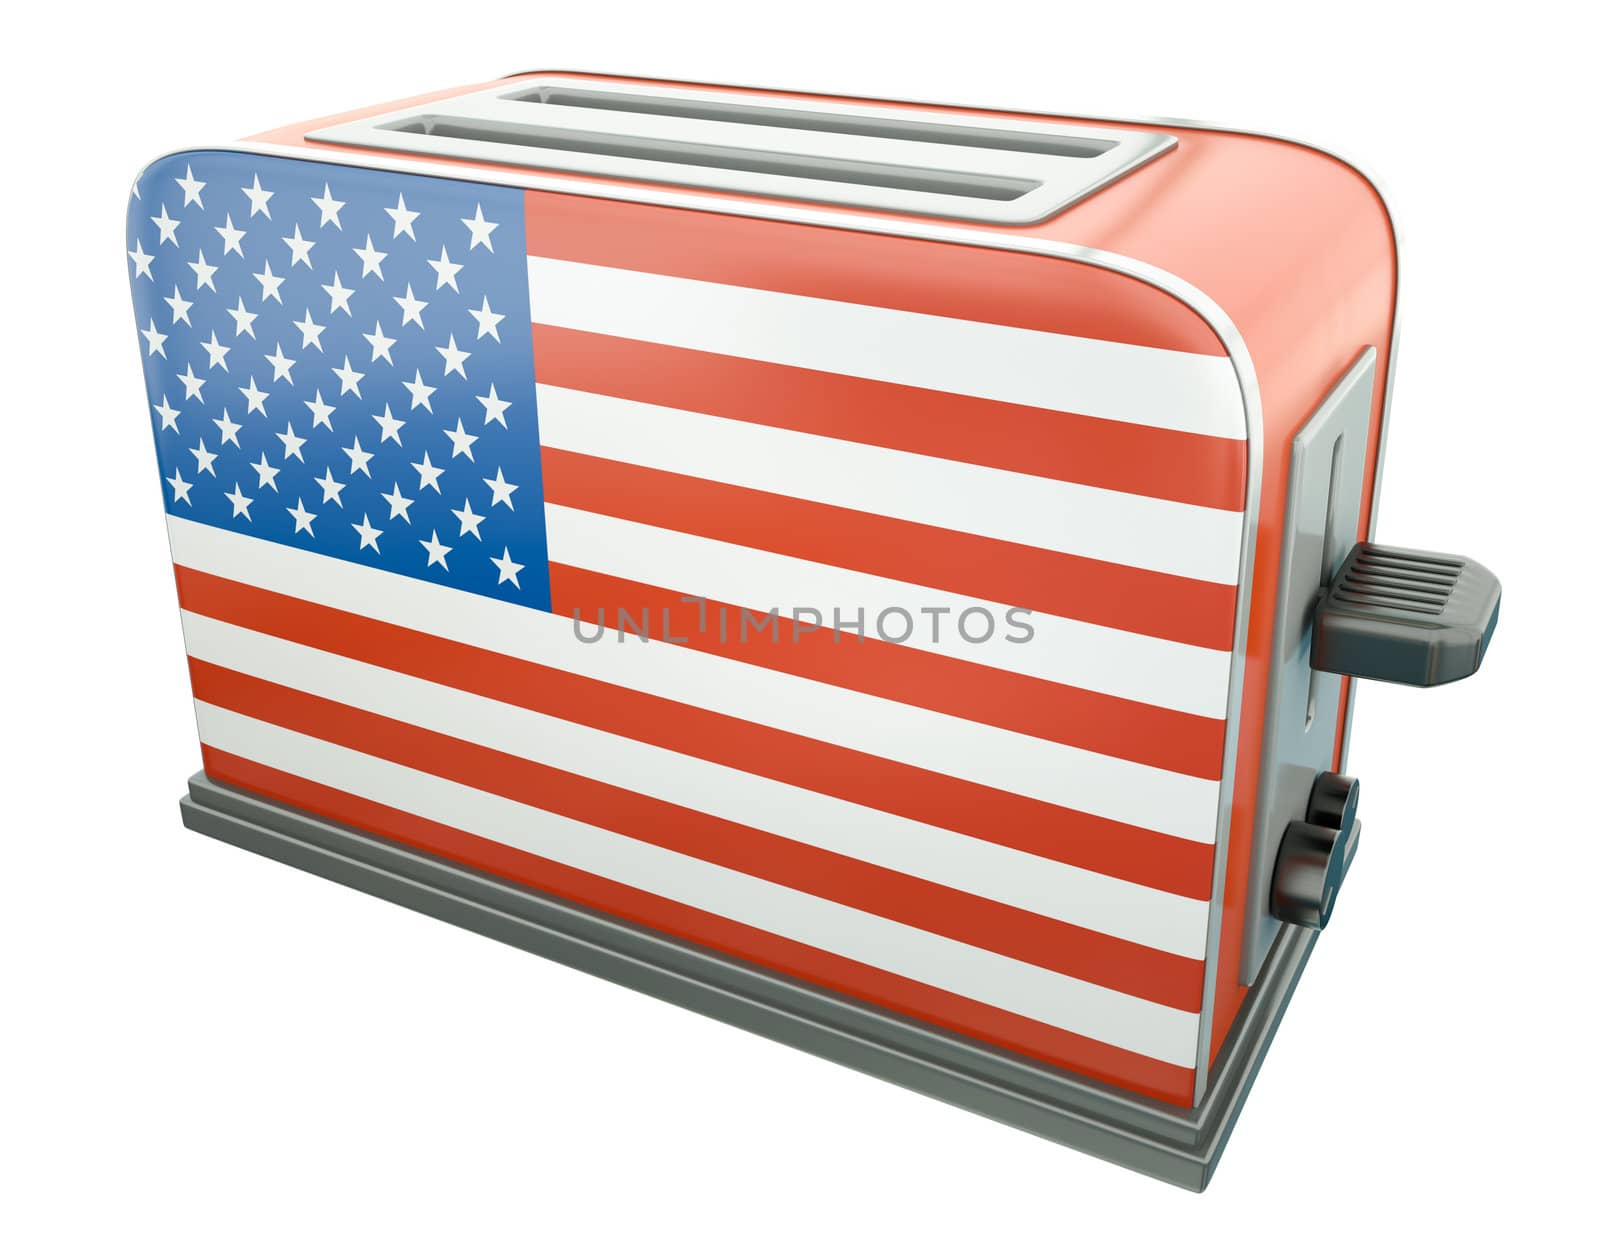 US themed toaster. 3D render.